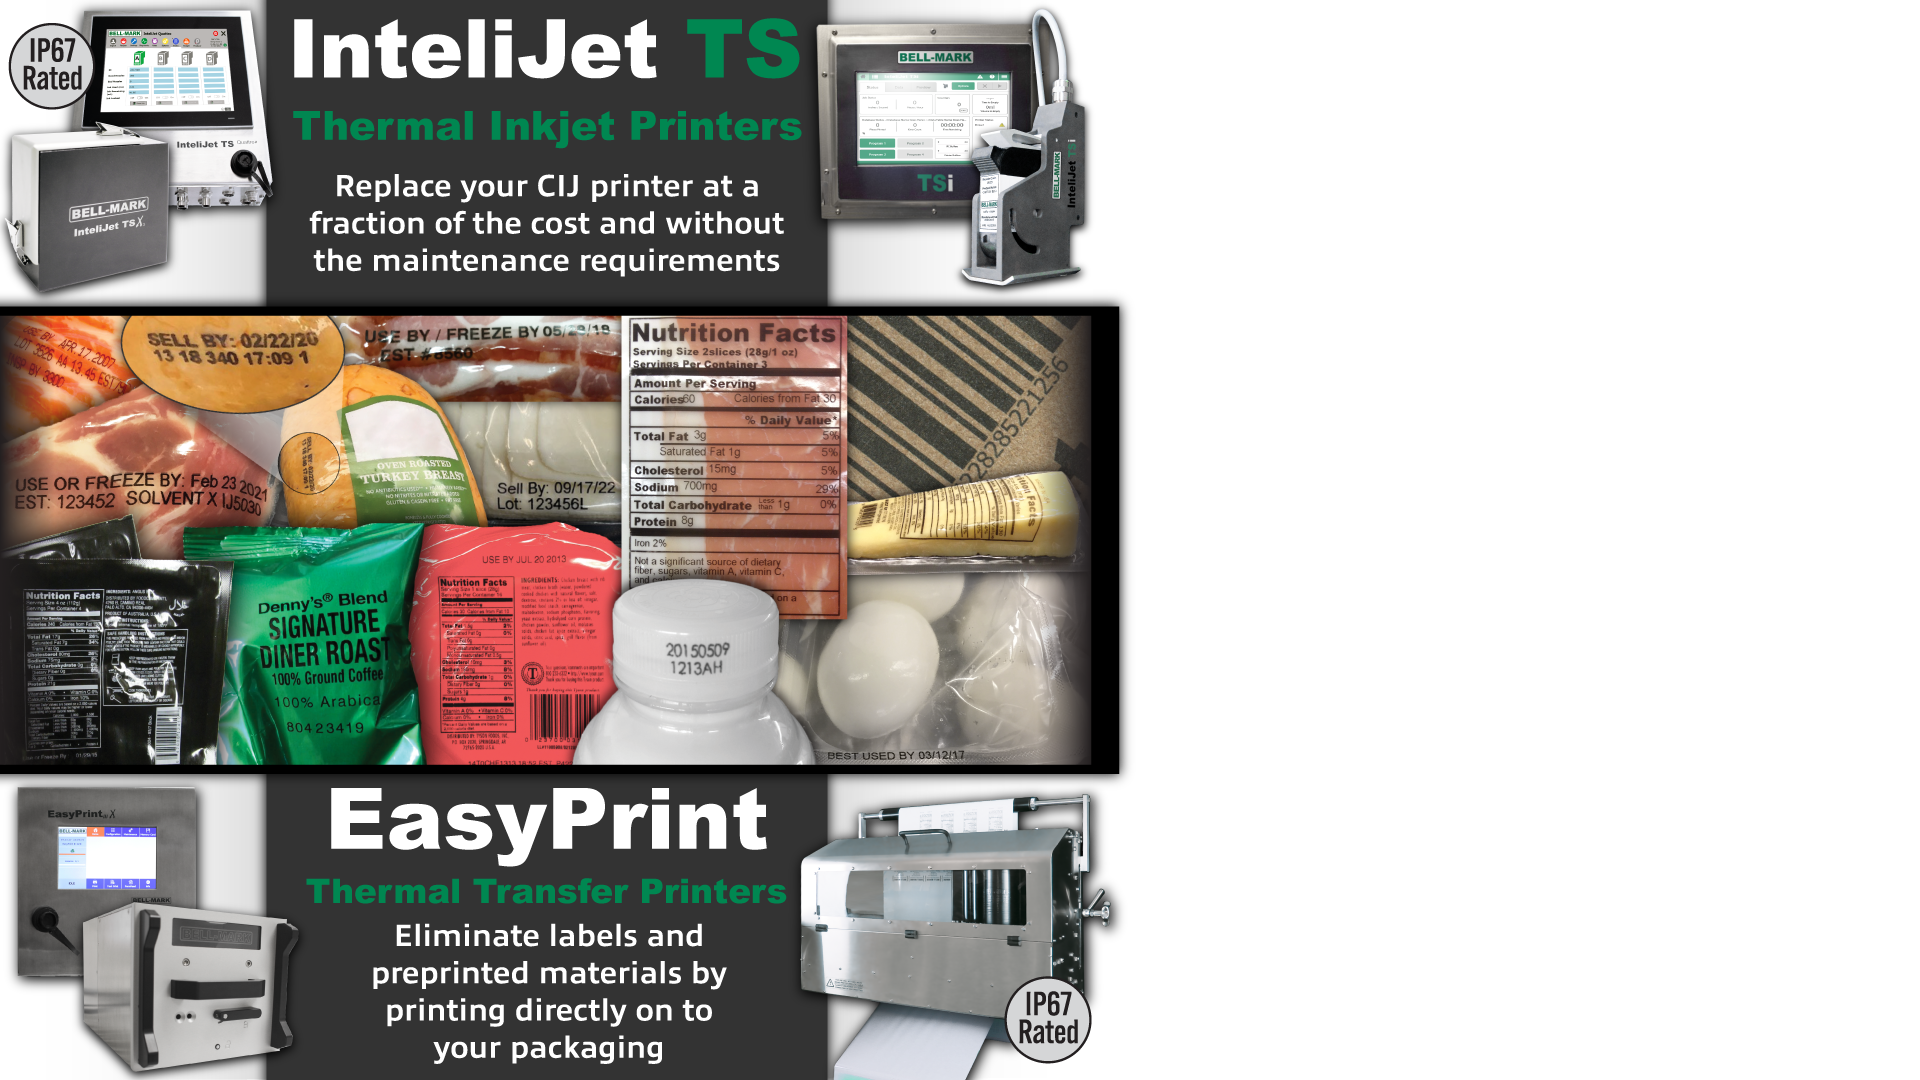 InteliJet TS Thermal Inkjet Printer - Replace your CIJ printer at a fraction of the cost and without the maintenance requirements |
										EasyPrint Thermal Transfer Printer - Eliminate labels and preprinted materials by printing directly on to your packaging